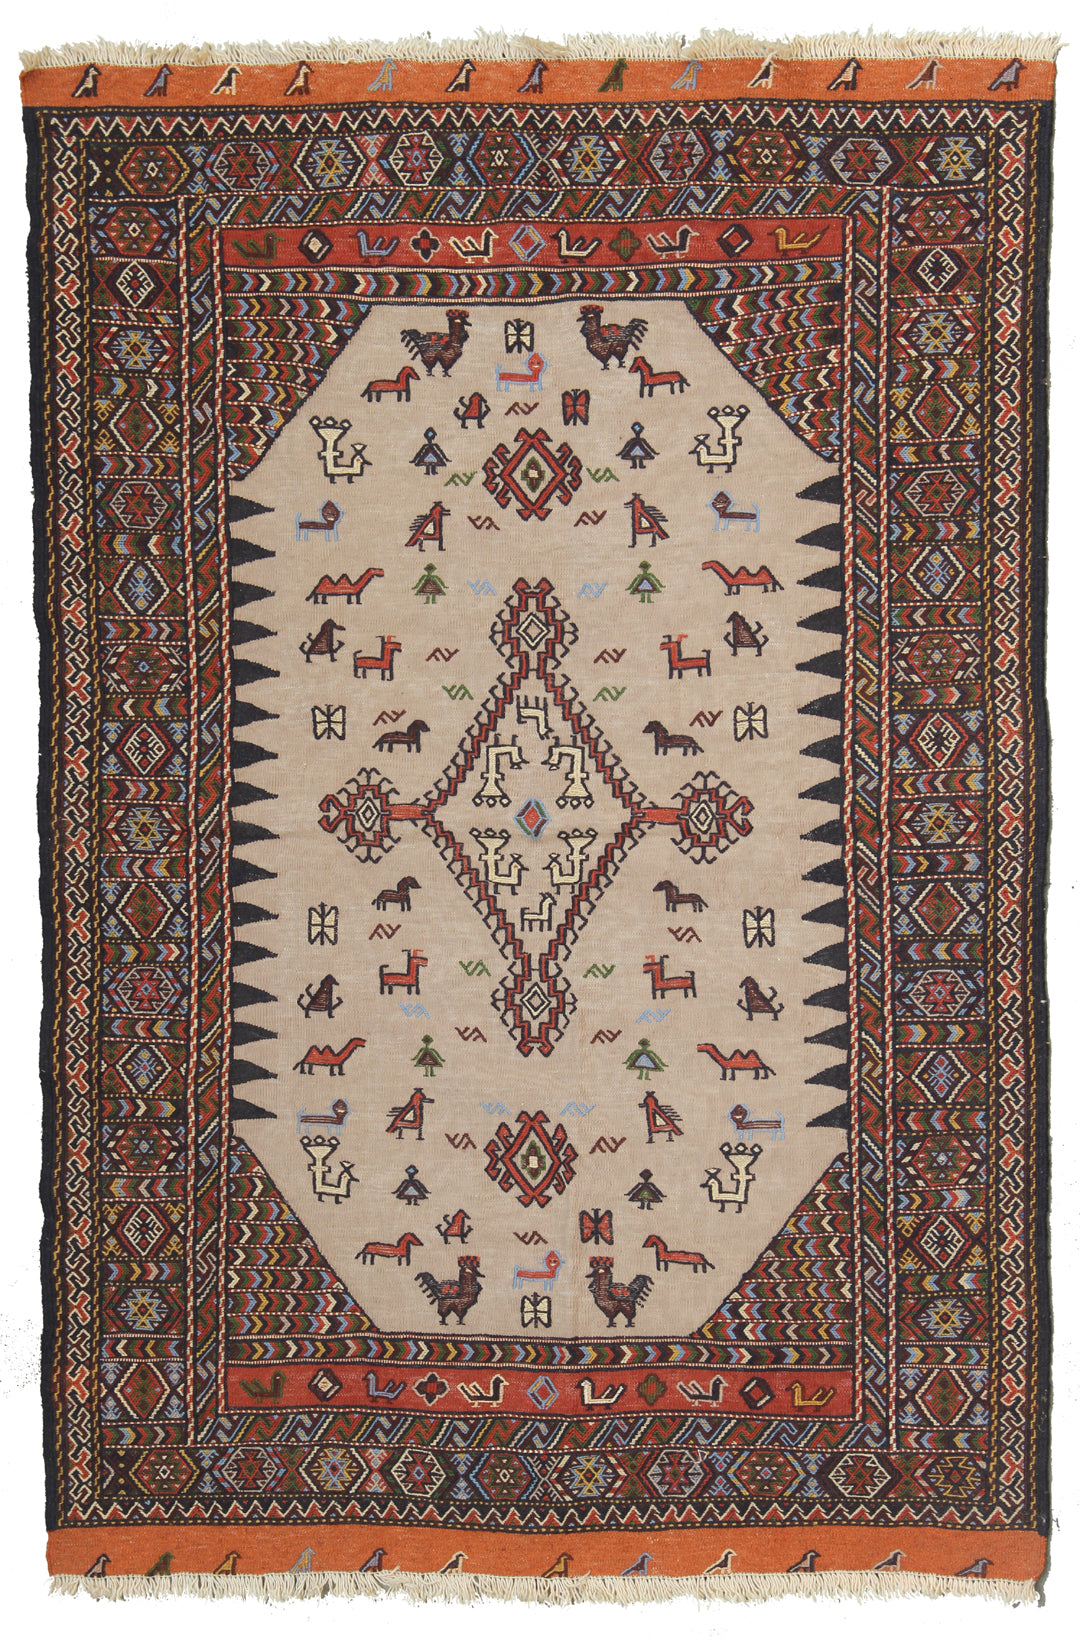 4'x4' Eastern Part of Persian Hand-woven with Soumak Embroidery Small Rug